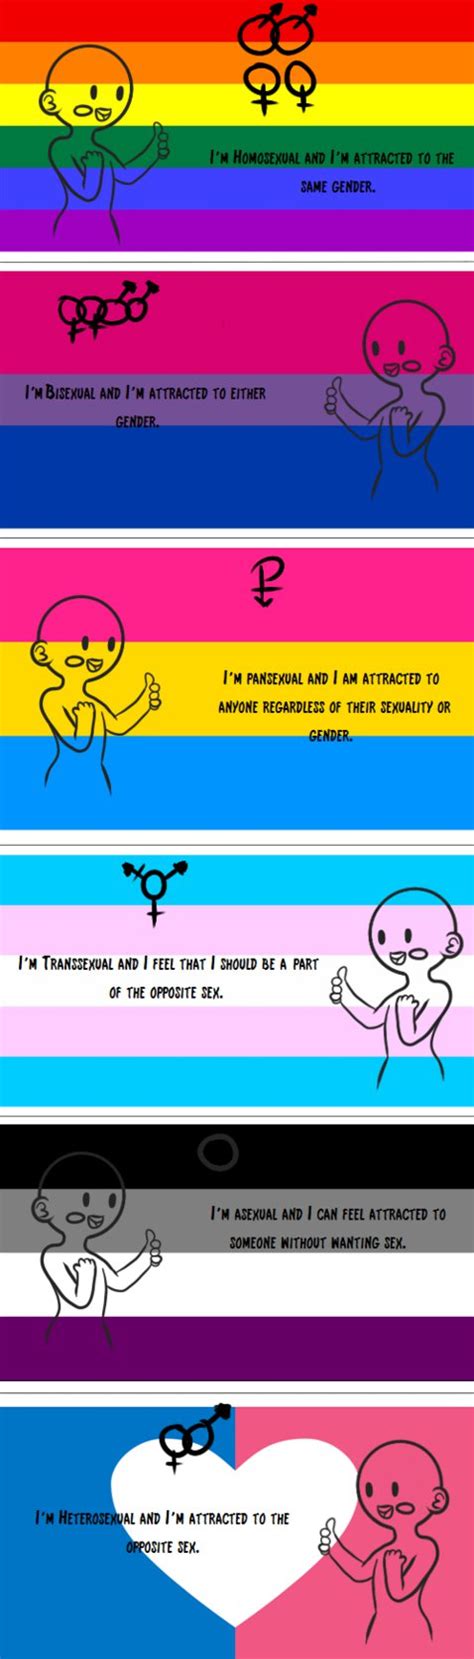 polysexual vs pansexual definition qiswat